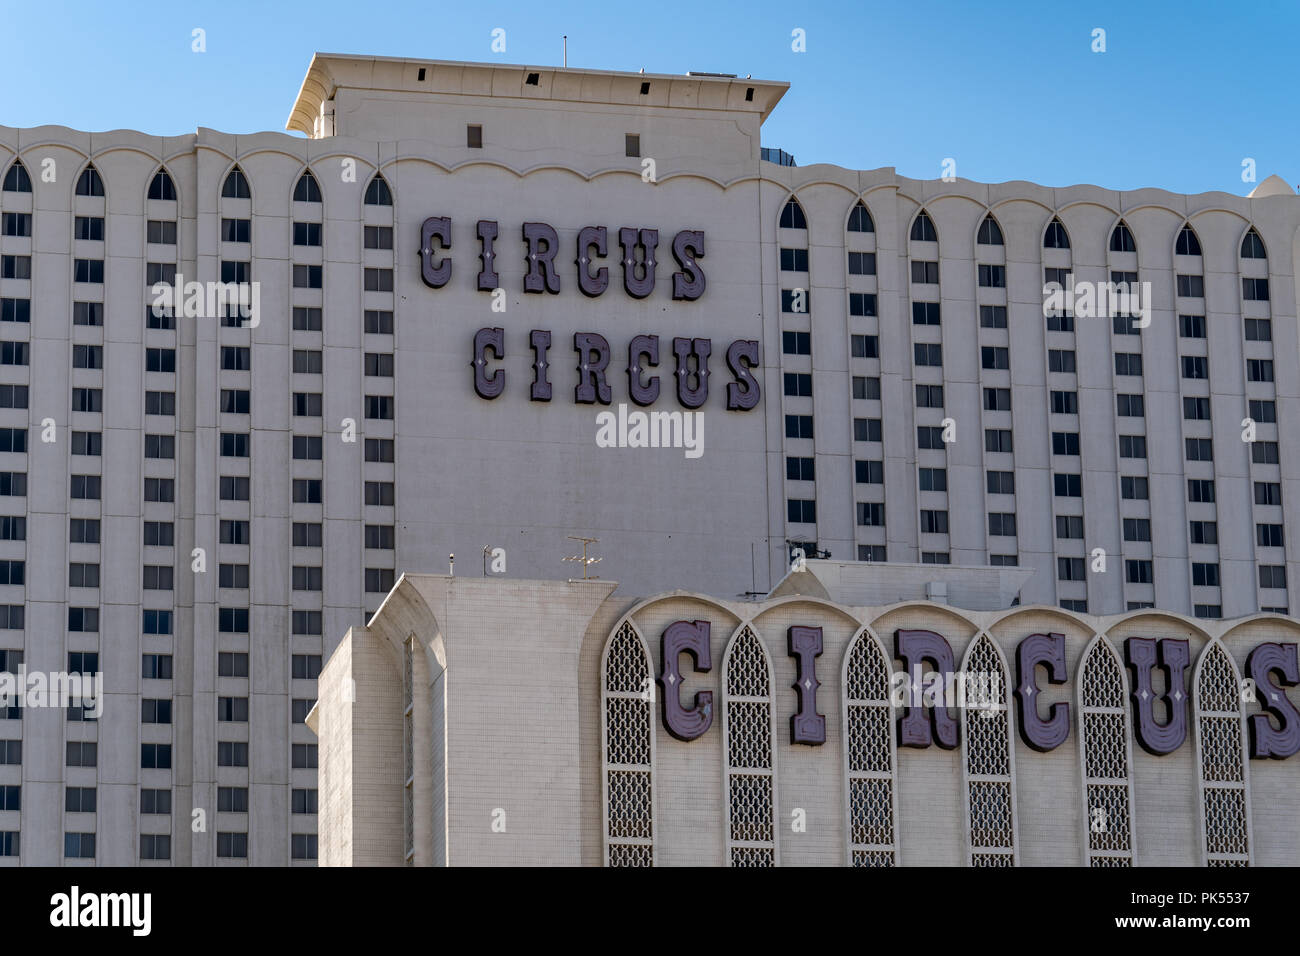 July 9 2018 Las Vegas Nevada Sign And Partial Building